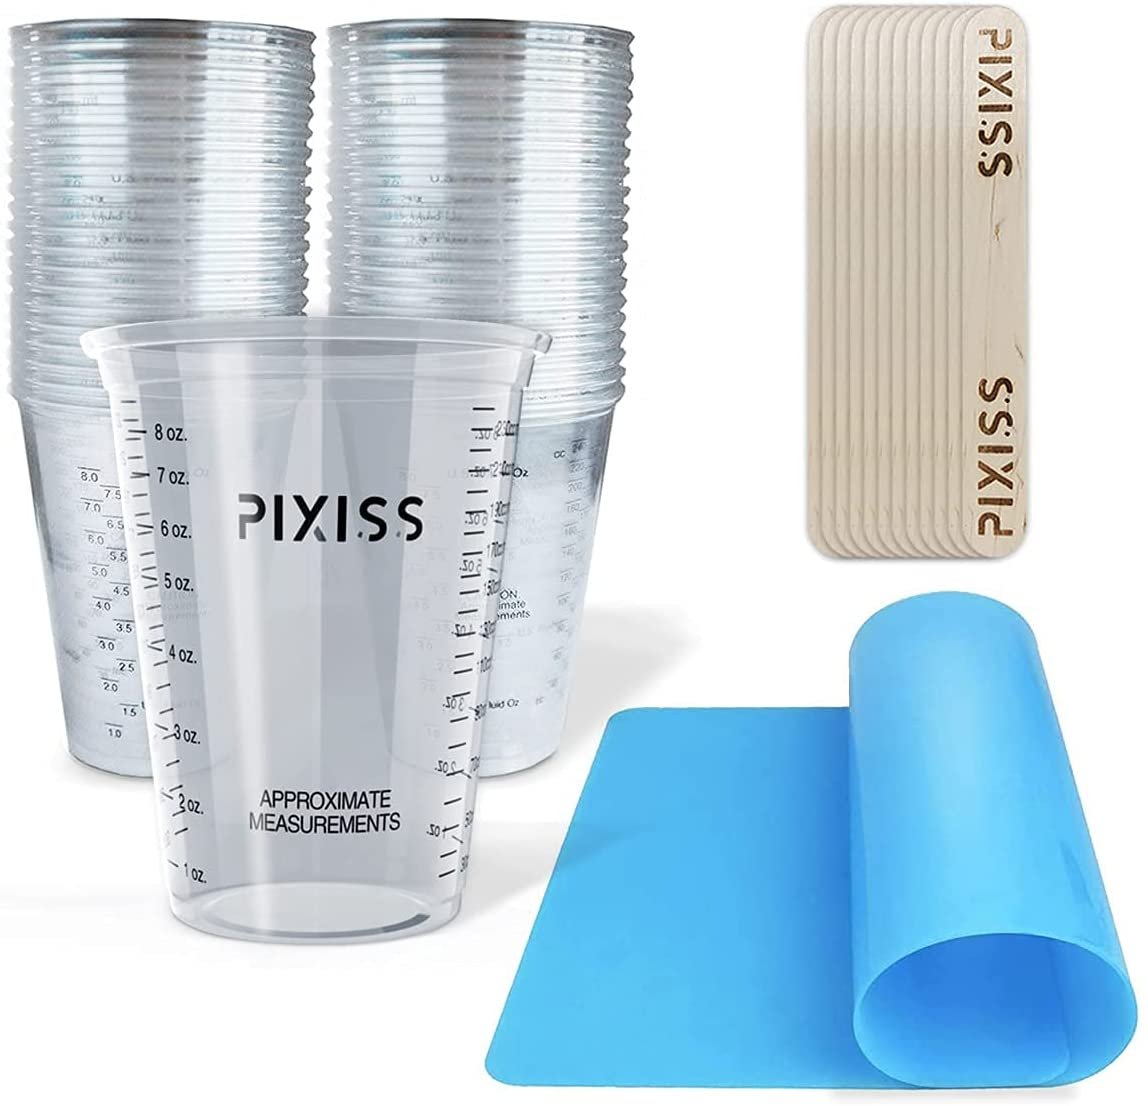 Disposable Measuring Cups For Resin - 20x Pixiss 10 Ounce Graduated Mixing  Cups for Epoxy Resin - Cups with Measuring Lines, Large Silicone Sheet for